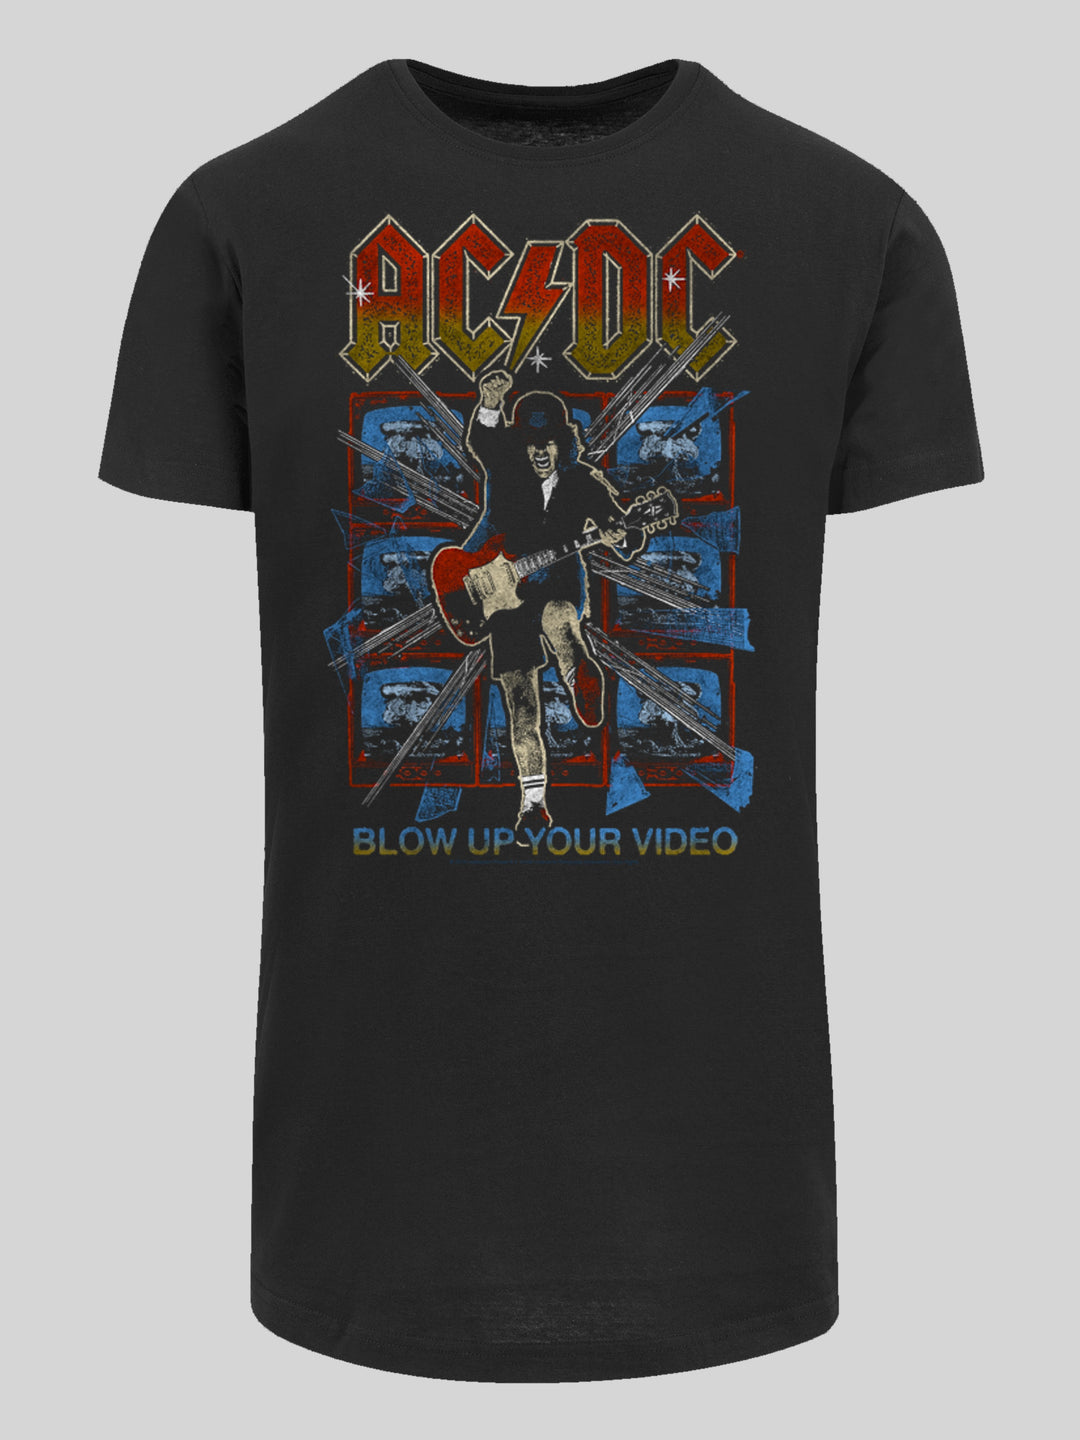 ACDC T-Shirt | Blow Up Your Video | Extra Long Herren T Shirt